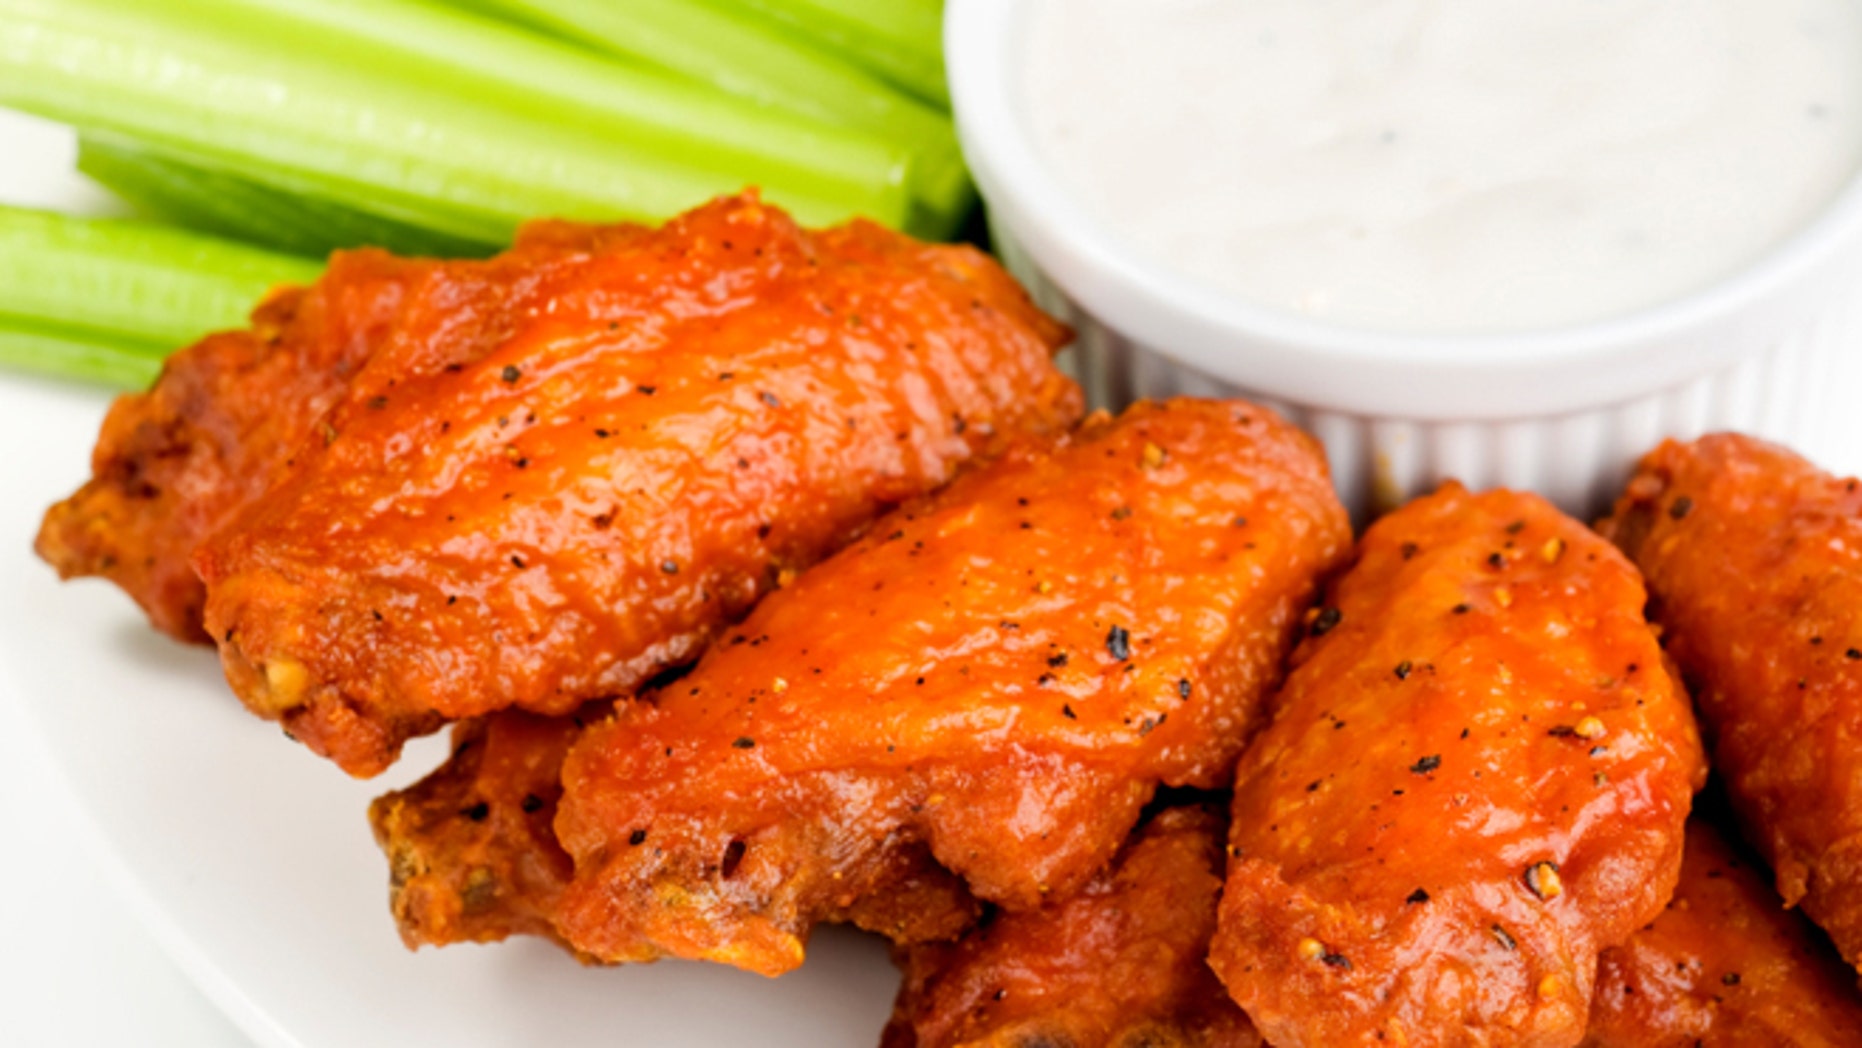 How To Make The Ultimate Buffalo Wing Fox News